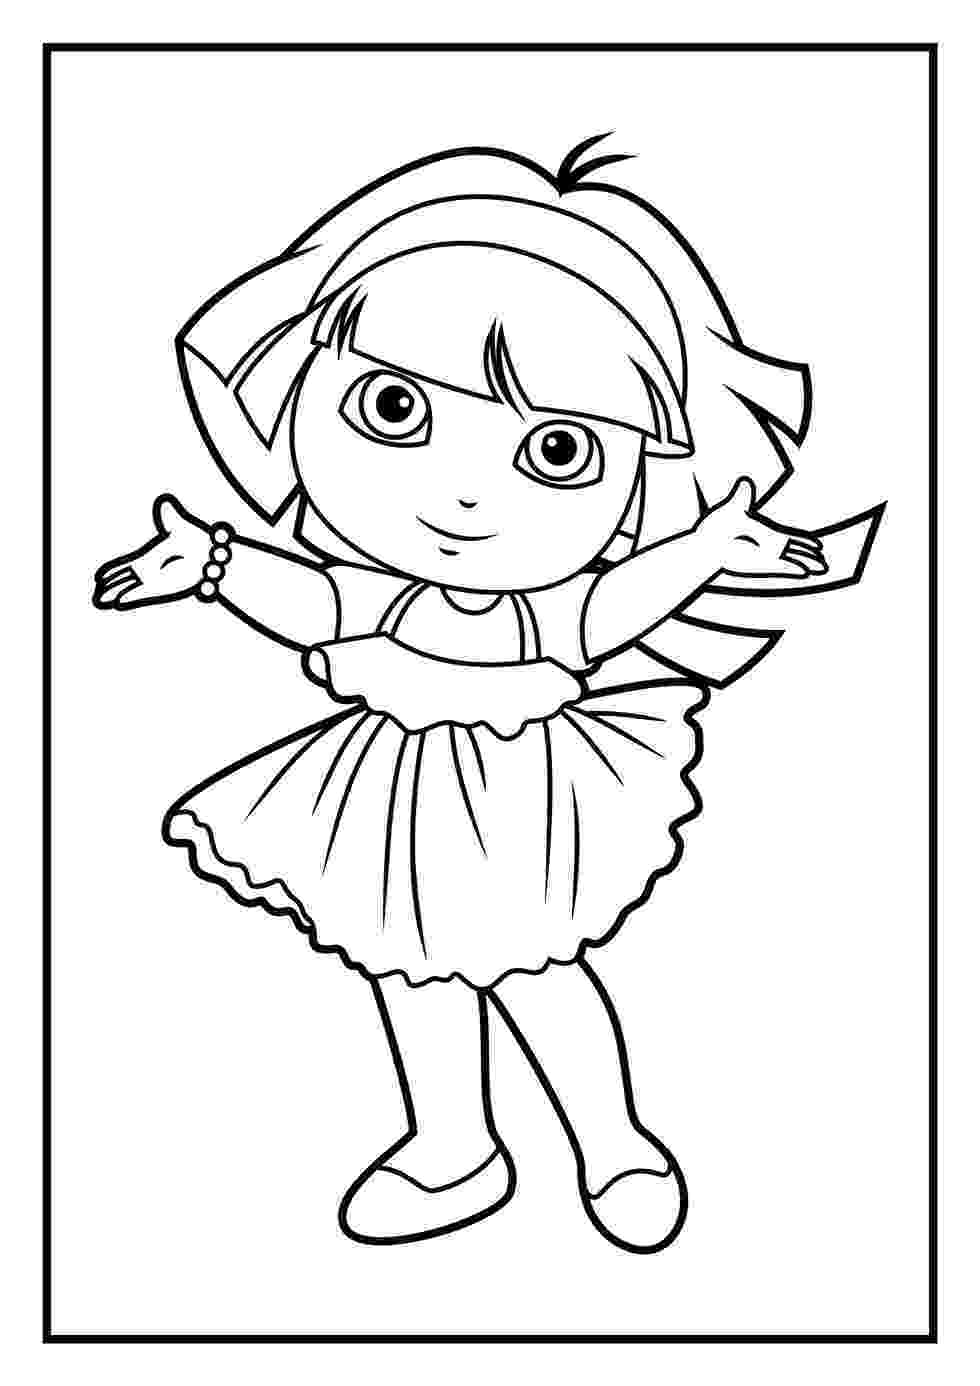 dora colouring page 19 dora coloring pages pdf png jpeg eps free dora page colouring 